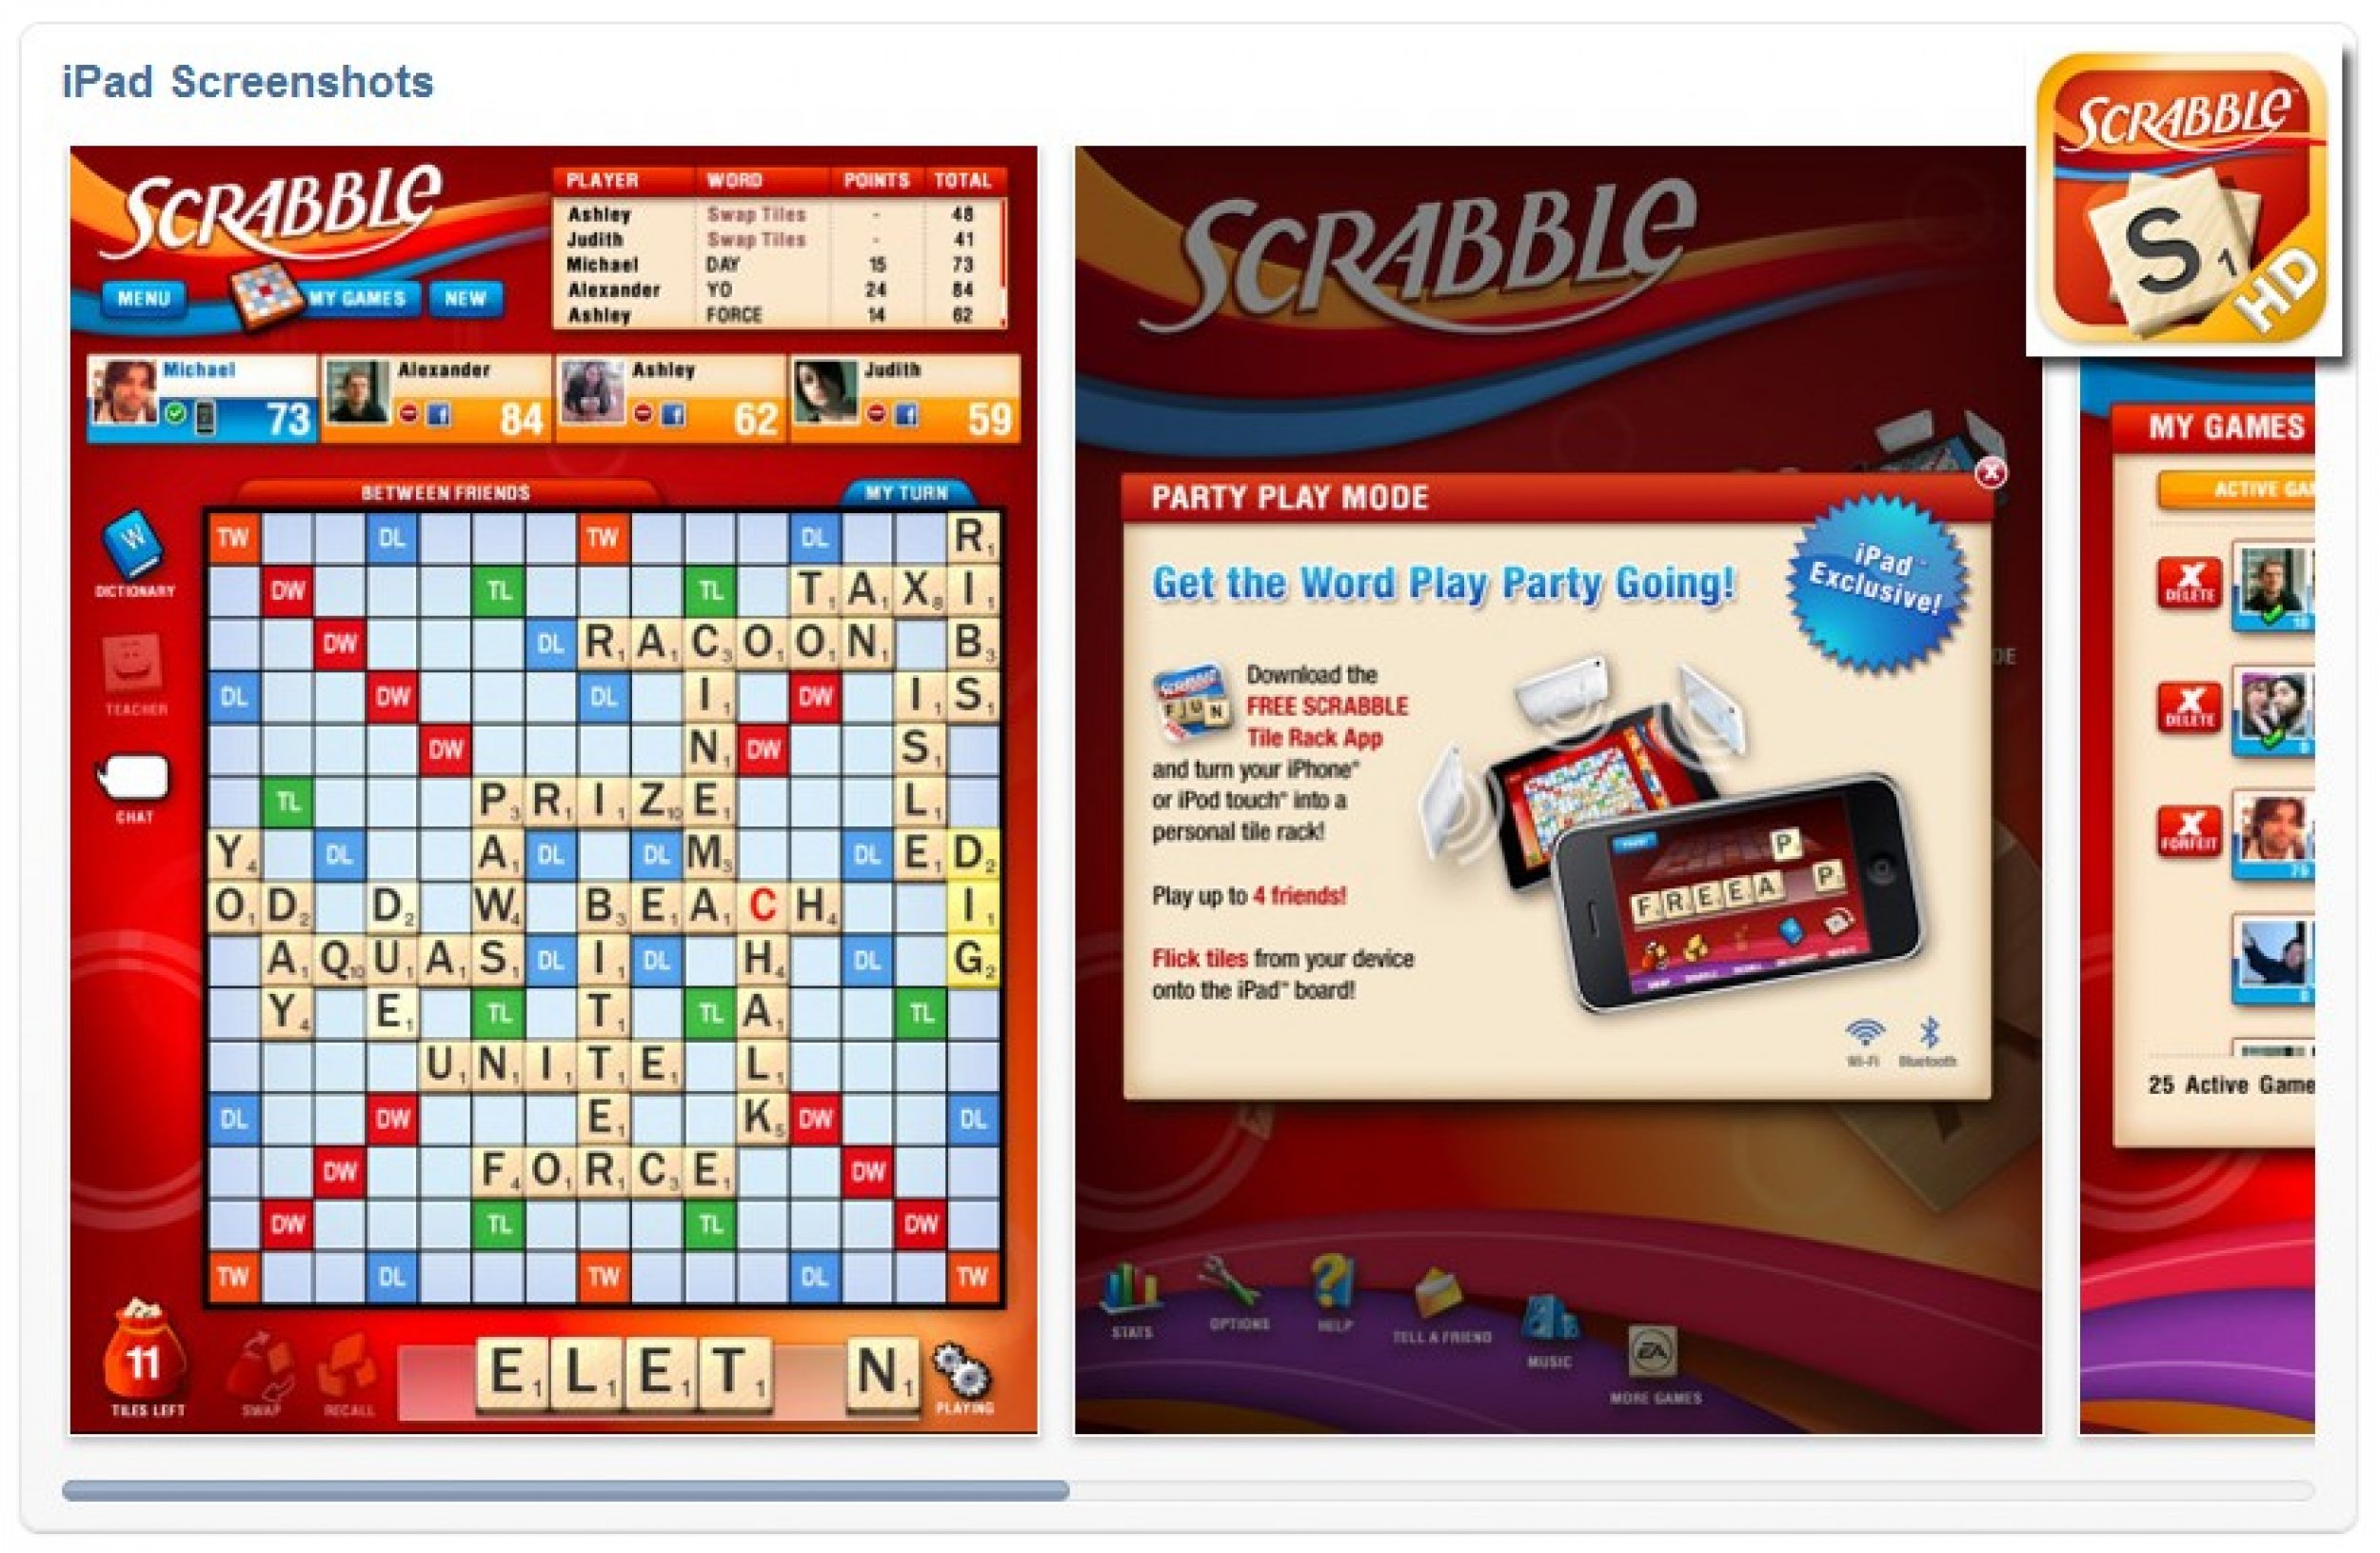 Scrabble Game - Top 50 must-have iPad apps